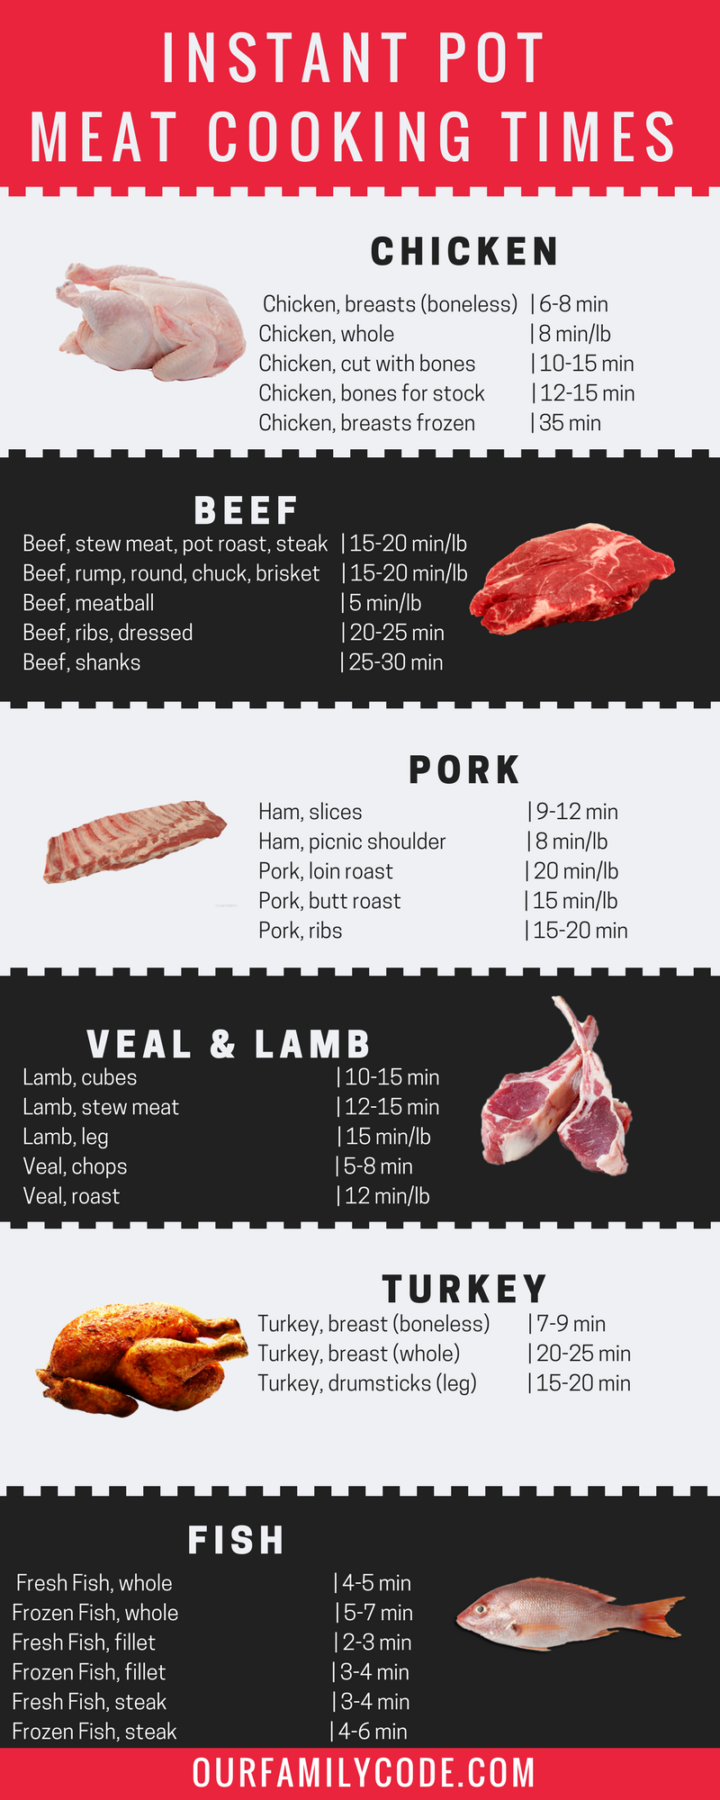 Get Your Free Instant Pot Meat Cooking Times Printable Here! #freebie #printable #InstantPot #cookingtimes #meat #cooking #pressurecook #howtocookmeatinaninstantpot #instantpotmeat